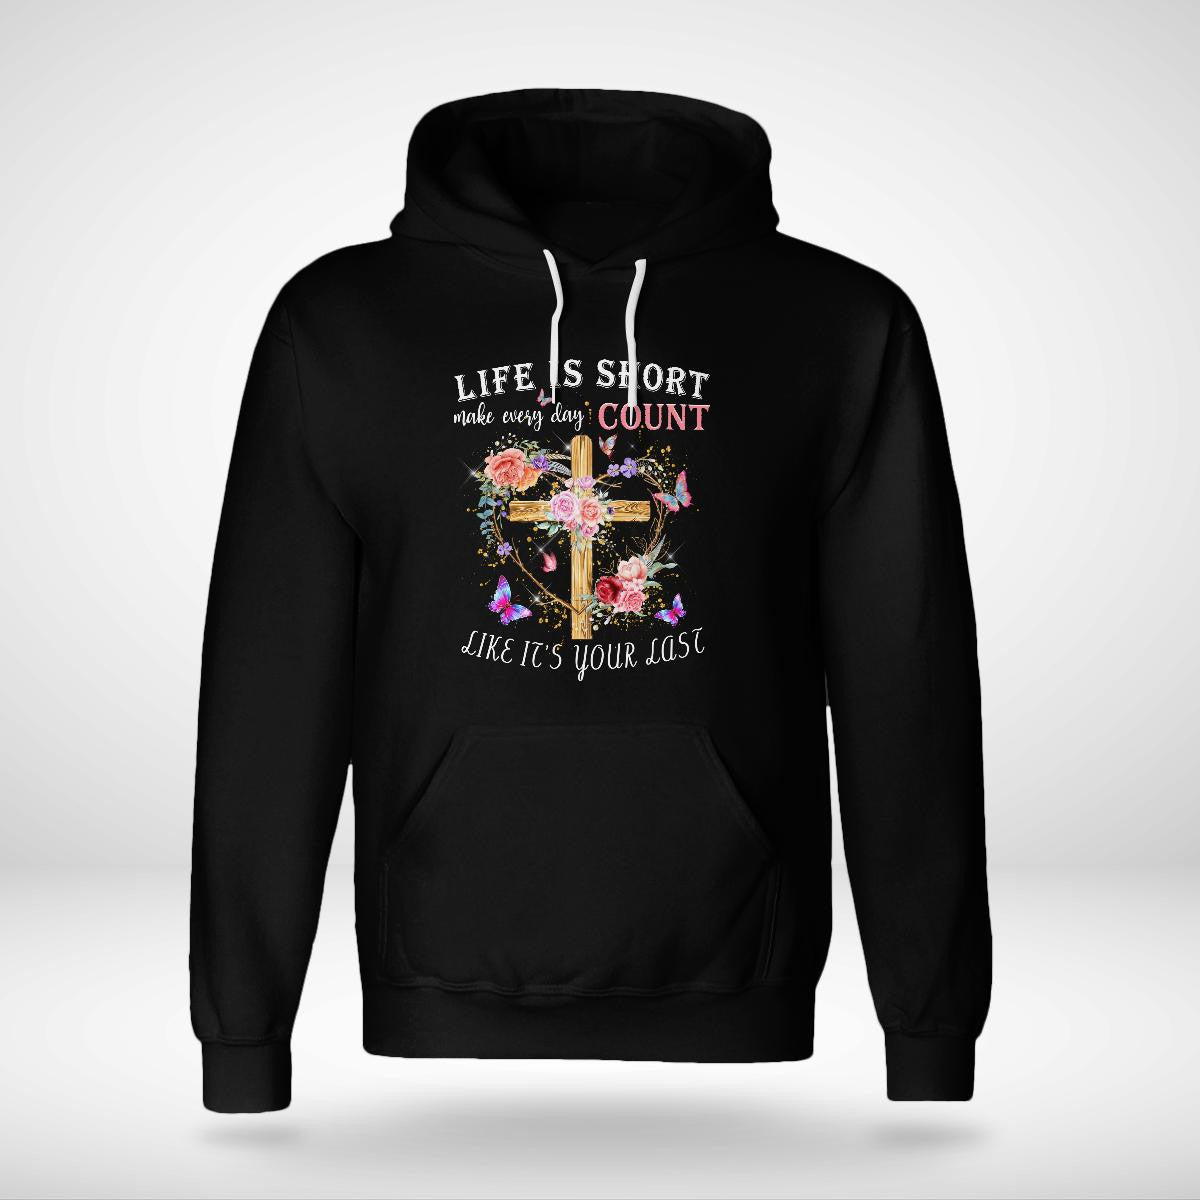 Life Is Short Make Every Day Count Like It's Your Last, Jesus Sweatshirt Hoodie, God T-Shirt, Faith T-Shirt